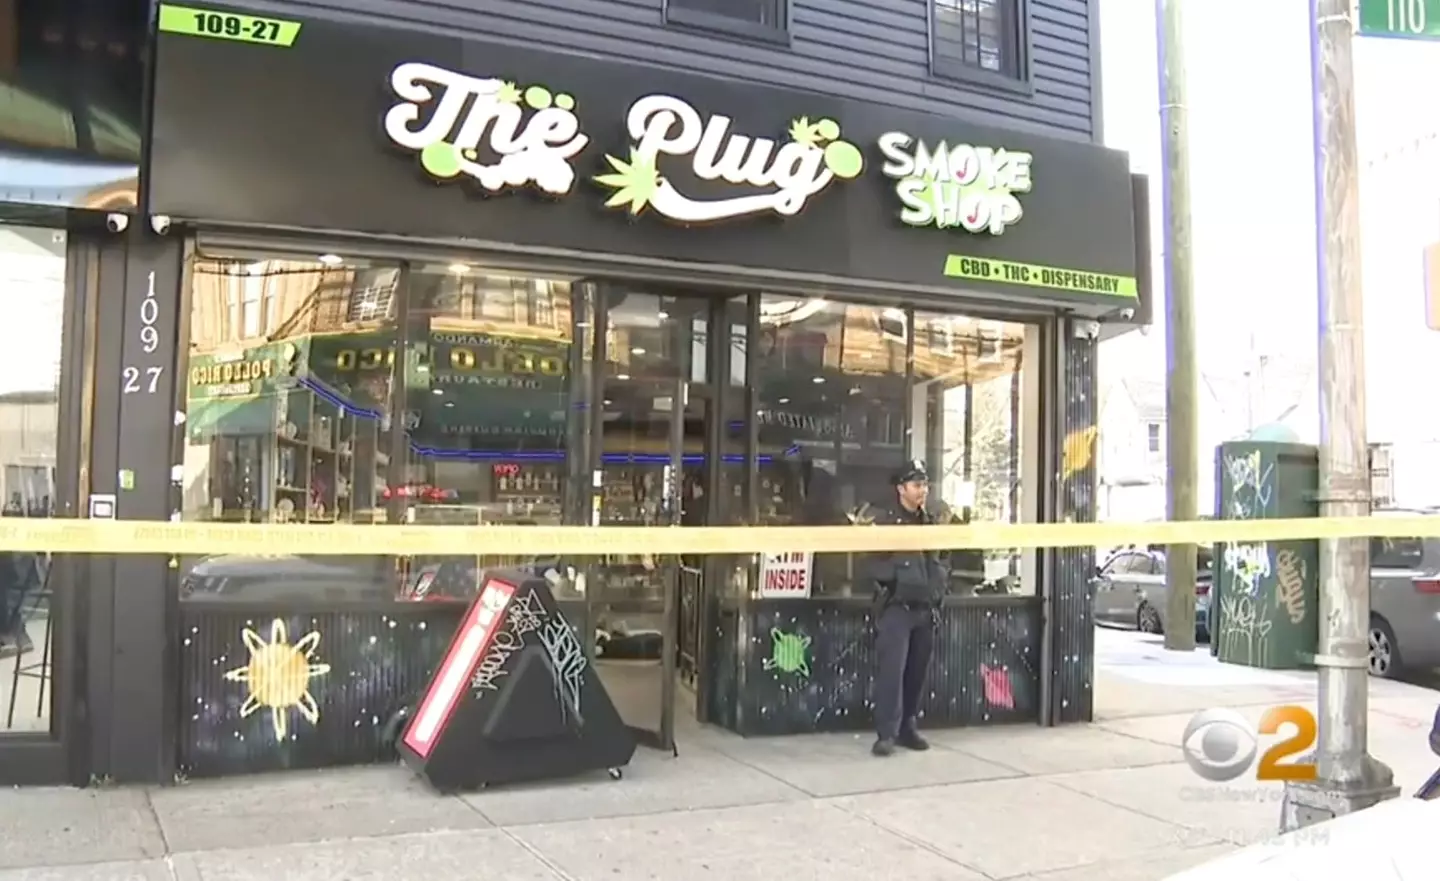 Smoke shop raids have been on the rise in New York City.